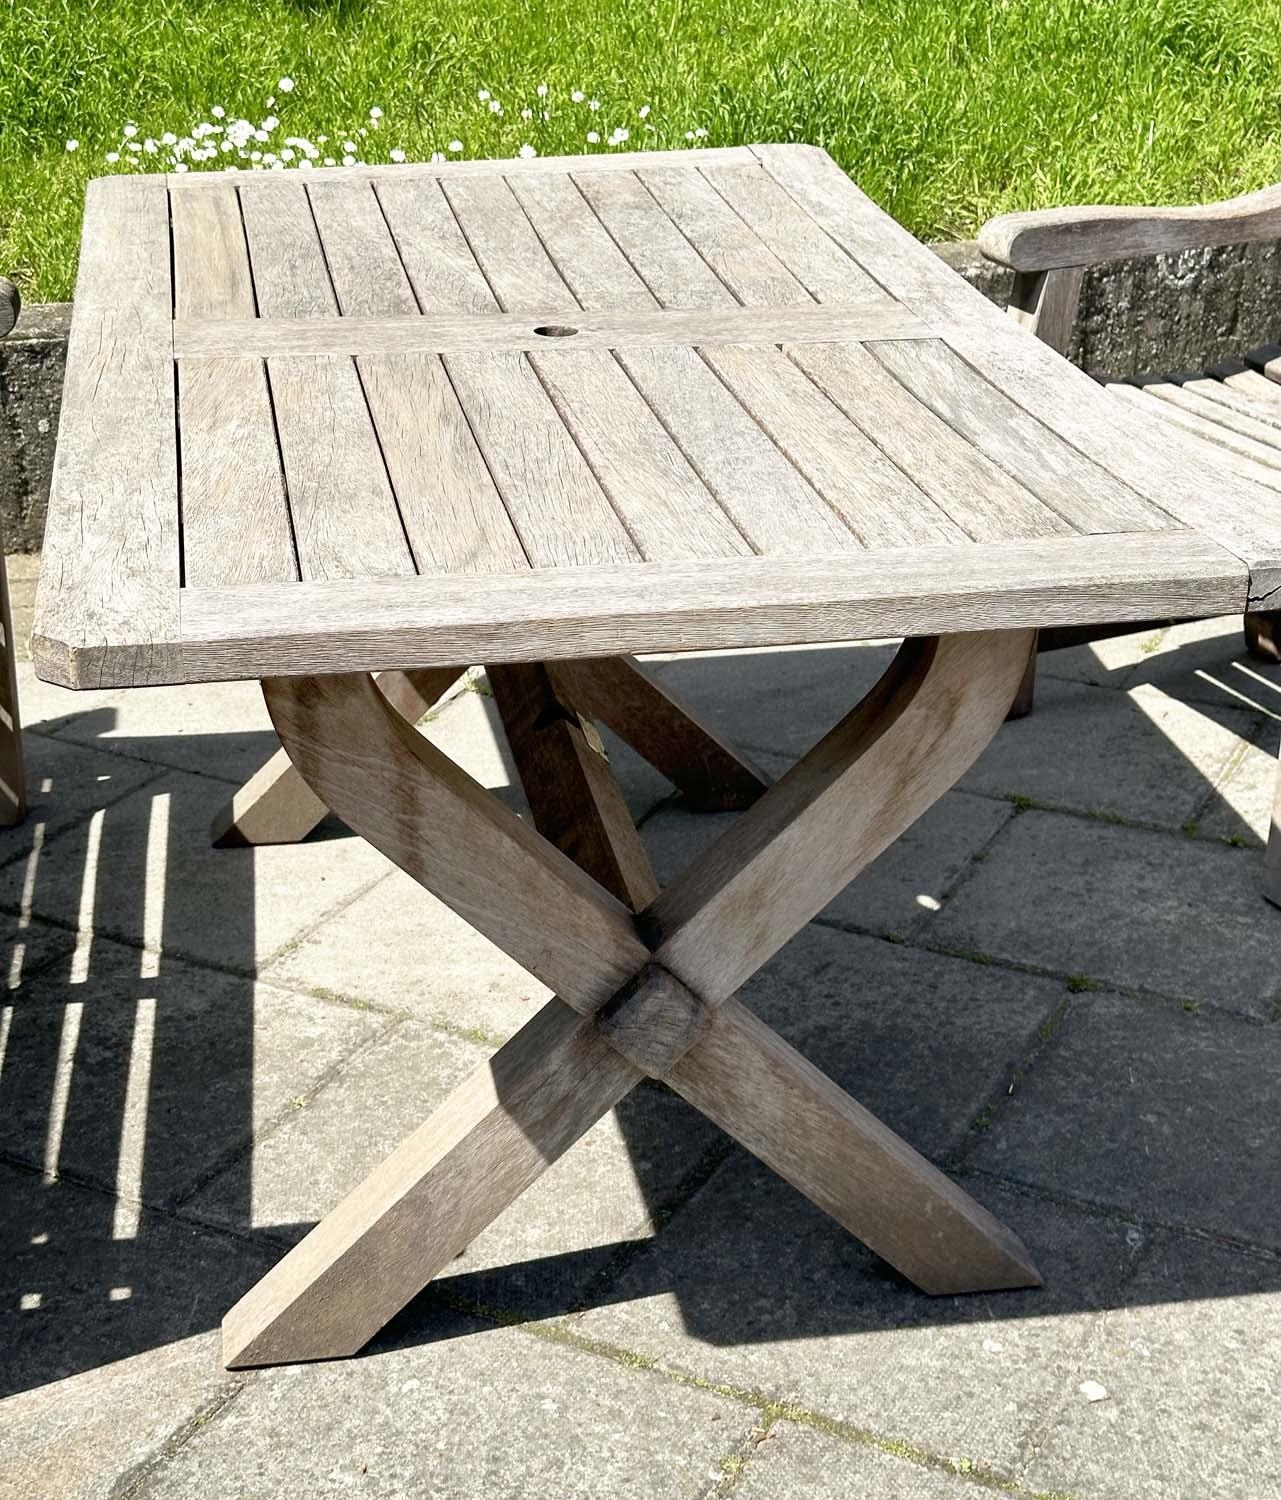 GARDEN SET BY WOODFERN, well weathered teak with substantial X frame table, 72cm H x 152cm W x - Image 15 of 22